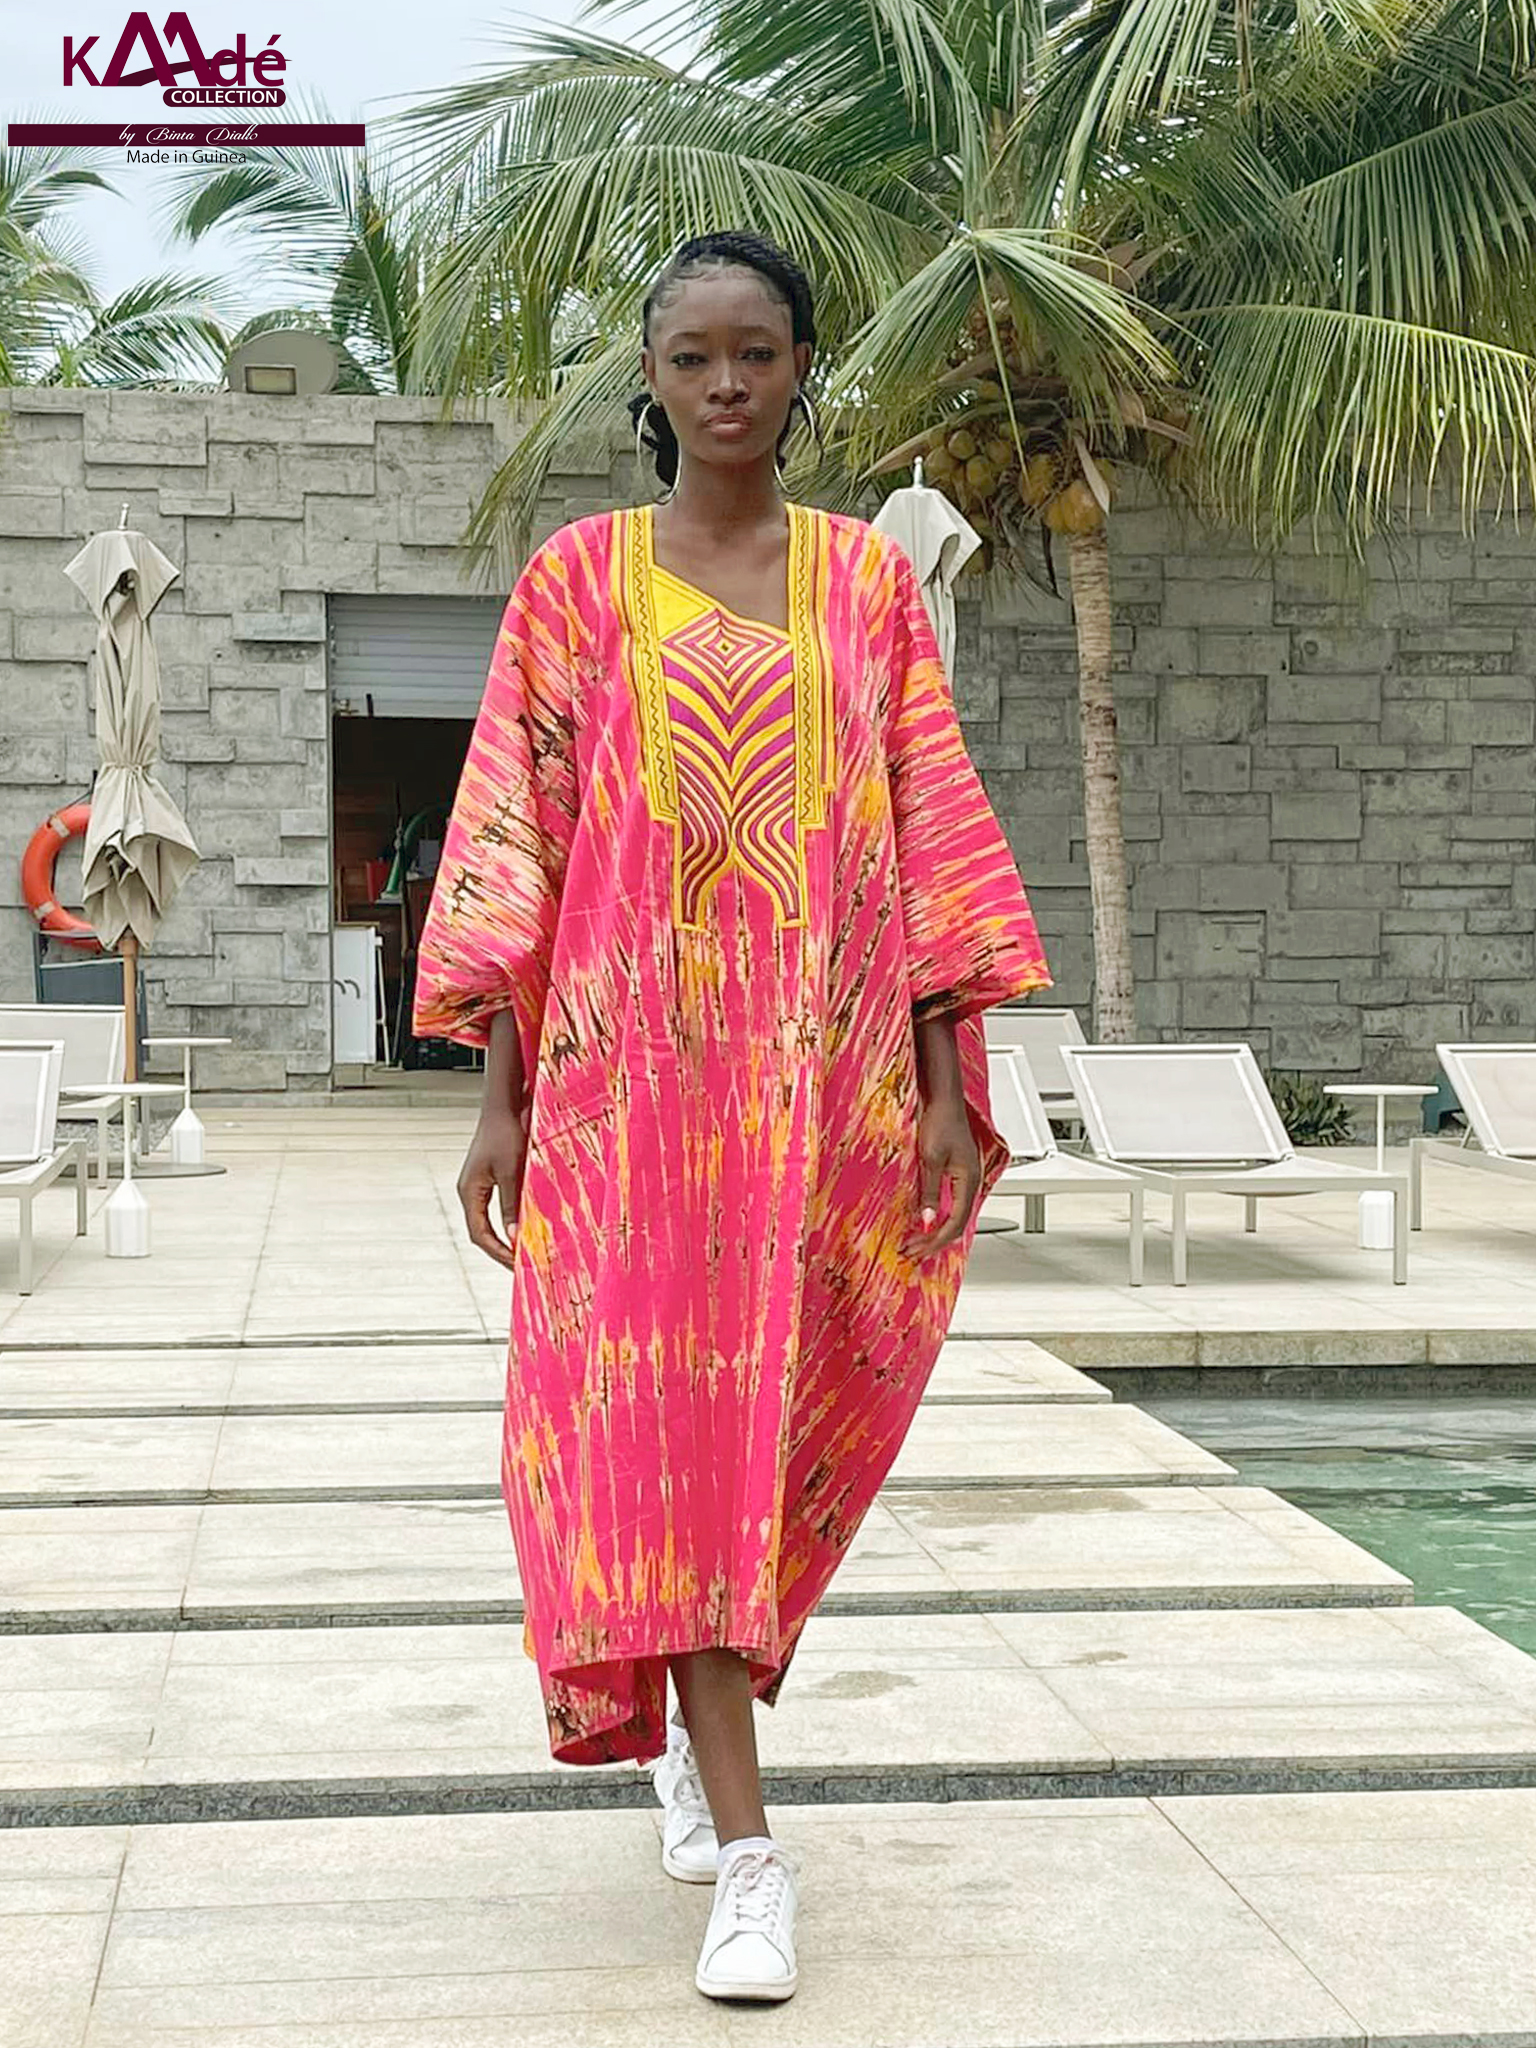 KAADE COLLECTION by BINTA DIALLO - Made in GUINEE - DN-AFRICA MEDIA PARTNER